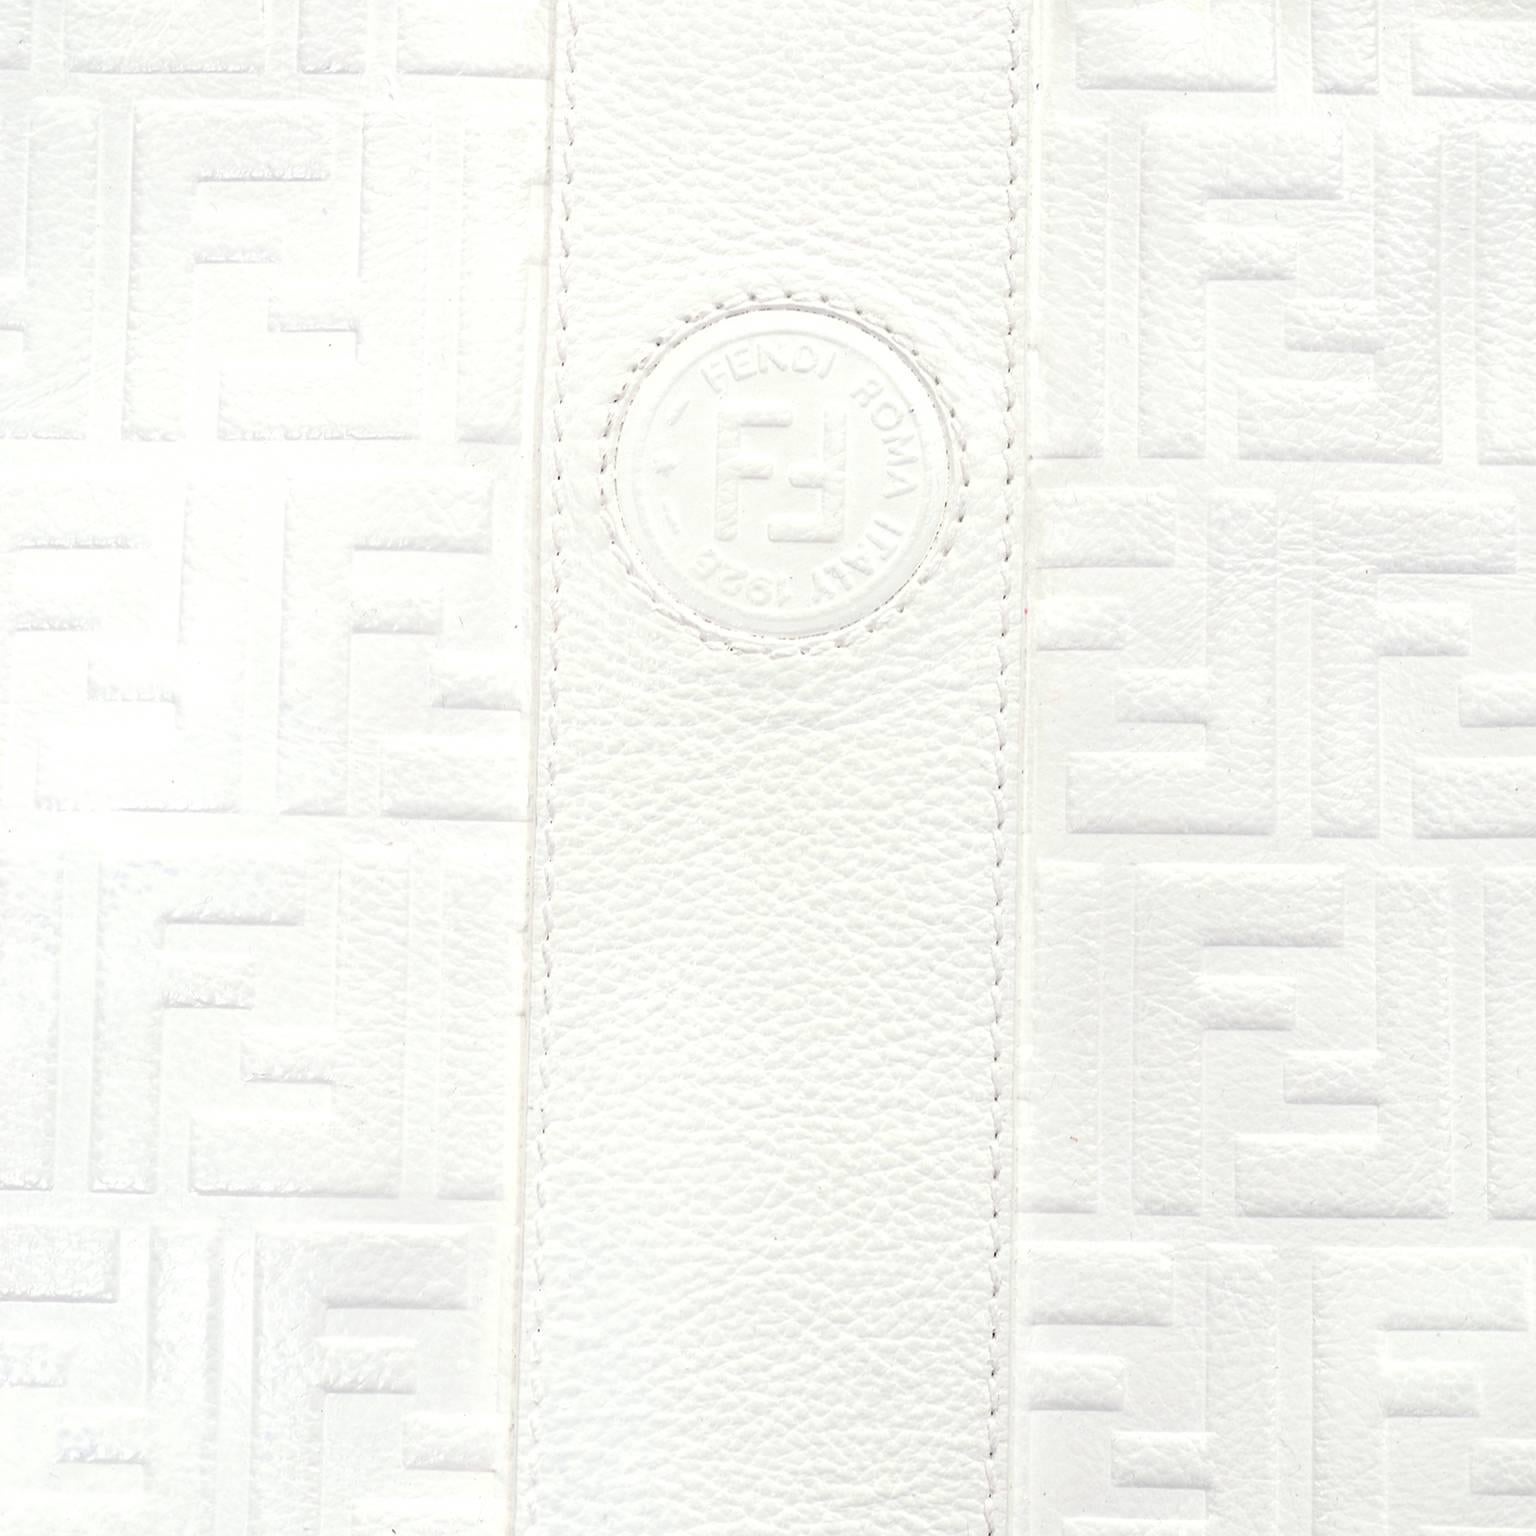 This large clutch style vintage white leather Fendi handbag has the F logo throughout the leather and measures 10 by 15